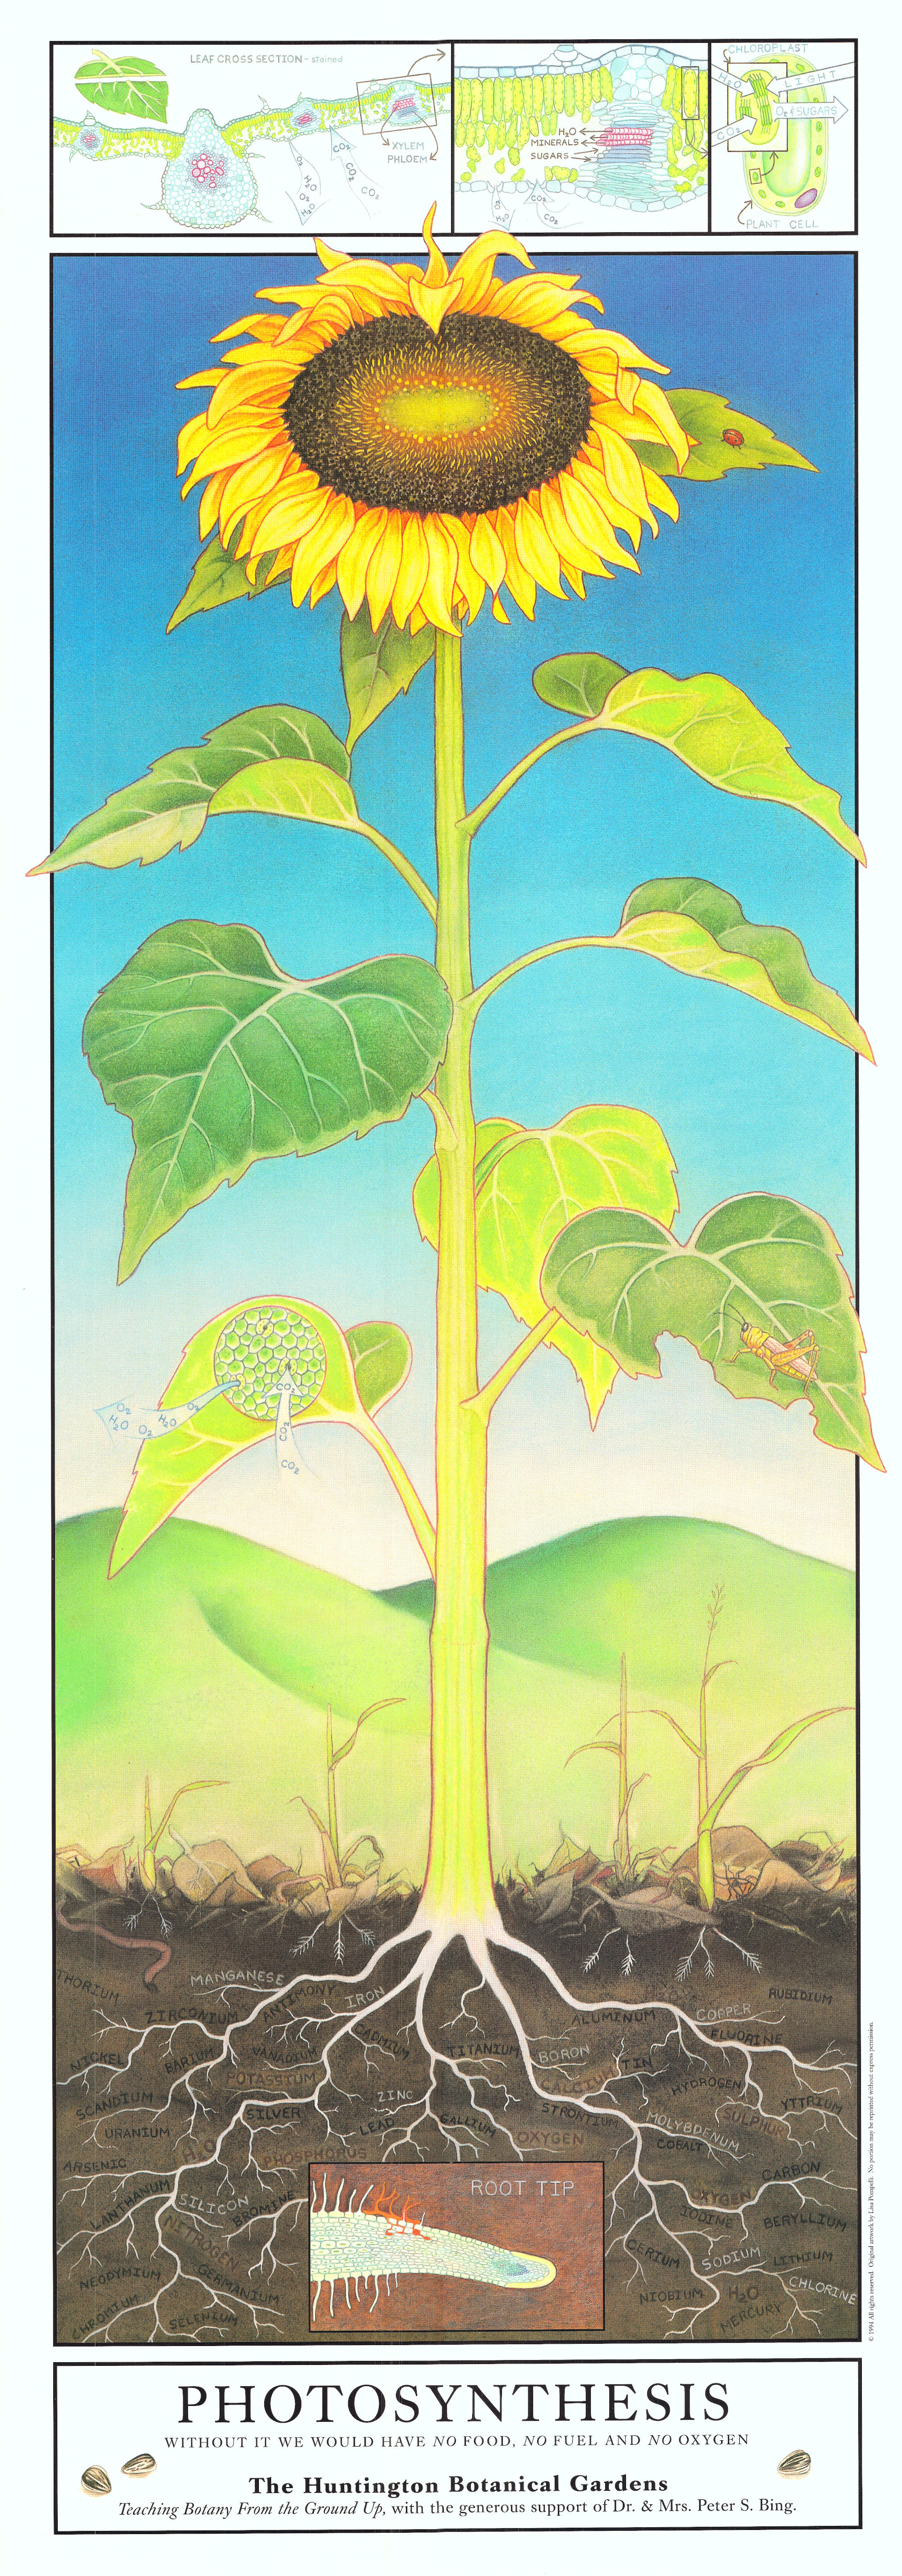 Poster illustrating the process of photosynthesis using a drawing of a sunflower